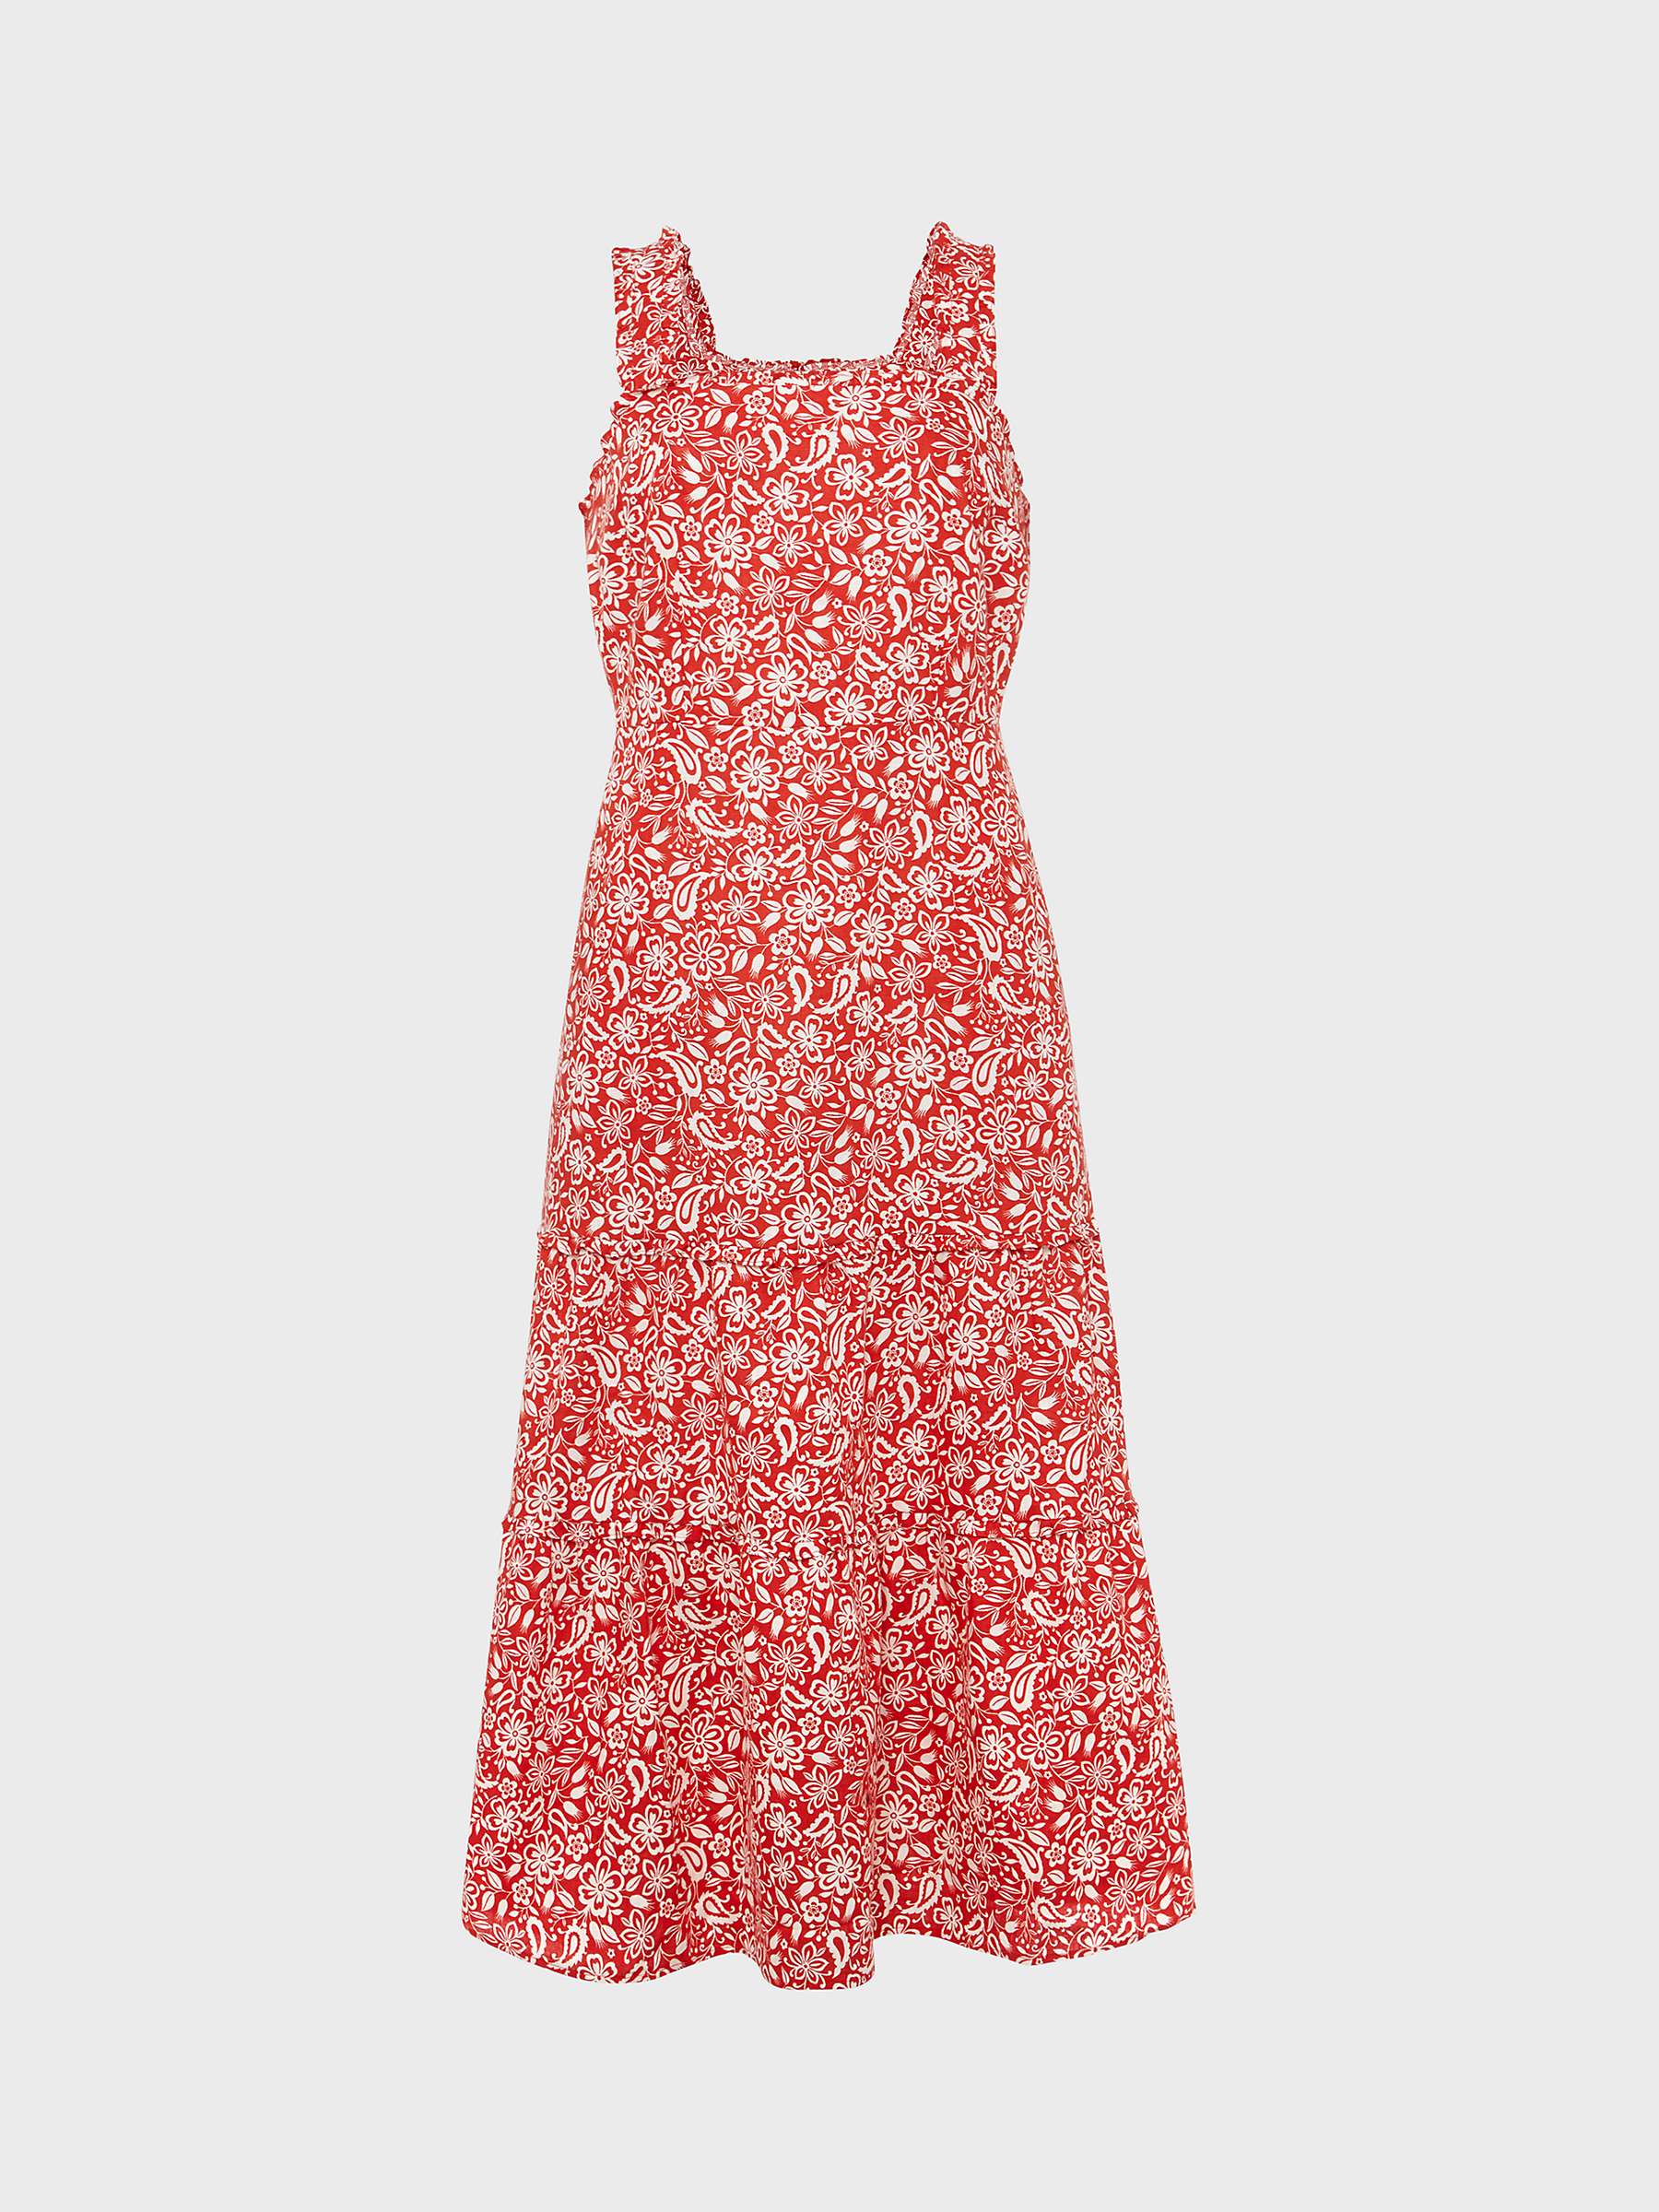 Buy Hobbs Tabitha Floral Midi Dress, Red/Clay Online at johnlewis.com